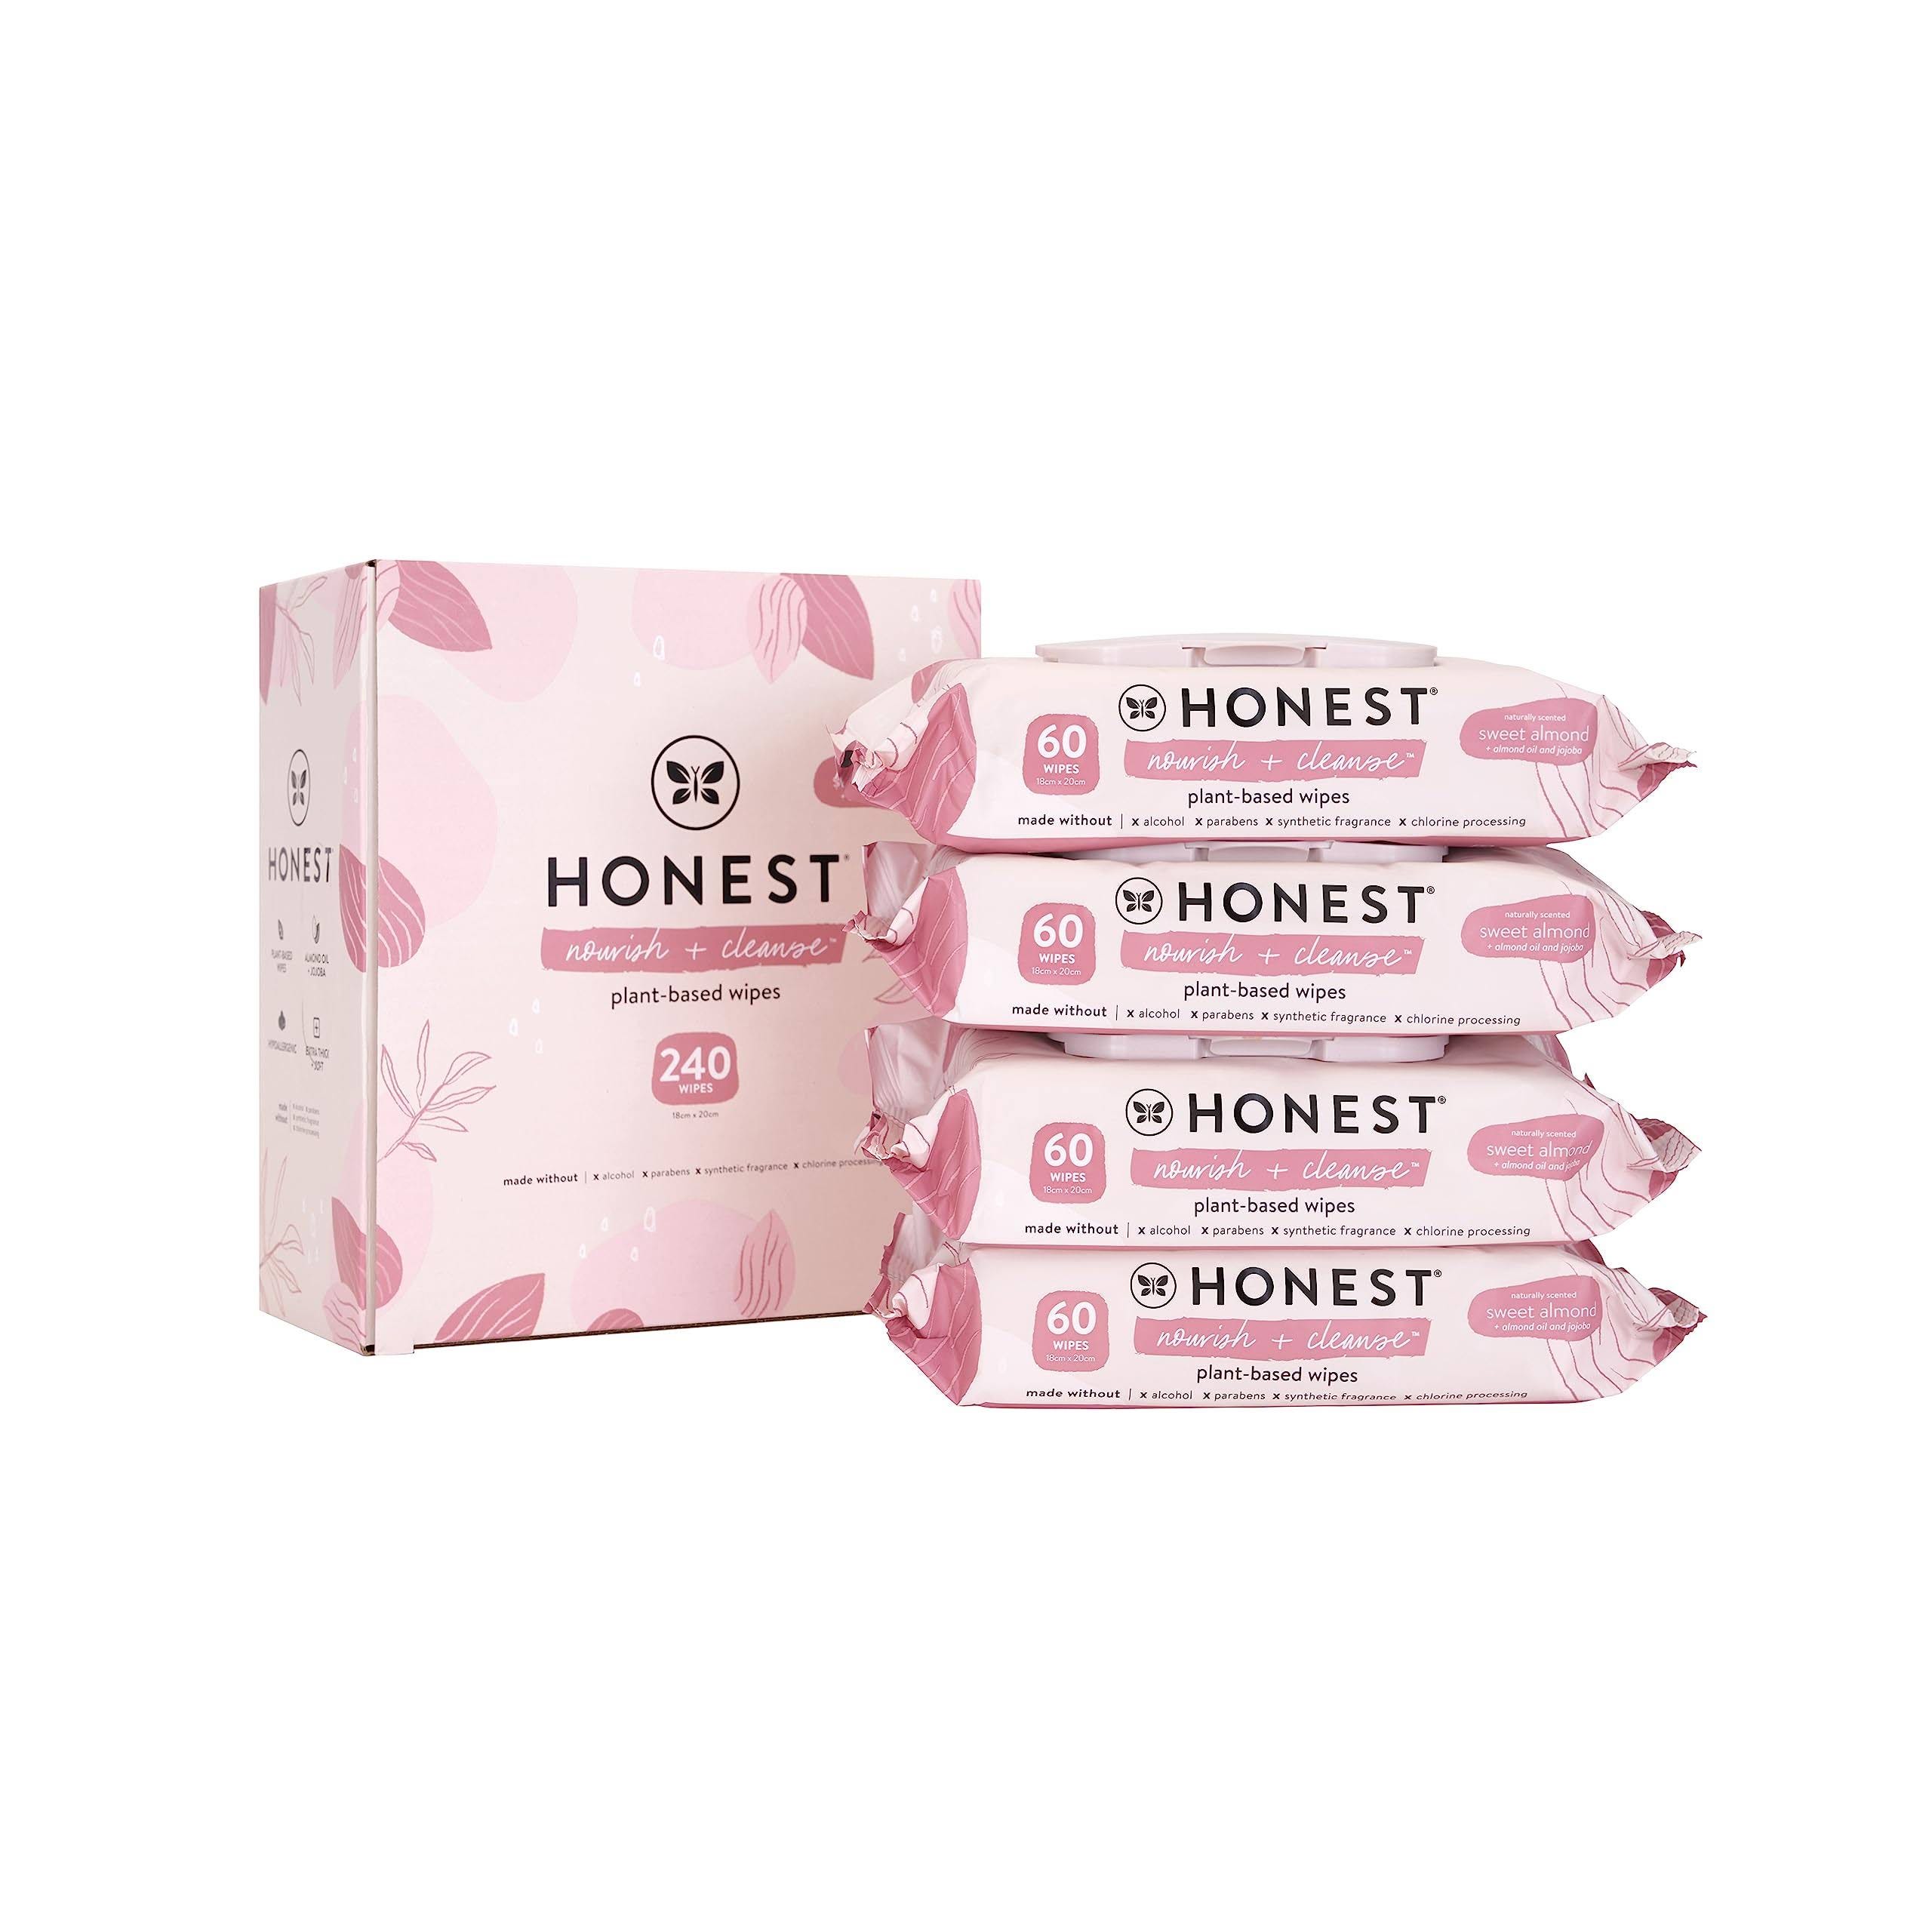 Honest Nourish + Cleanse 100% Plant-Based Wipes: Gentle, Scented, and Pocket-Sized | Image